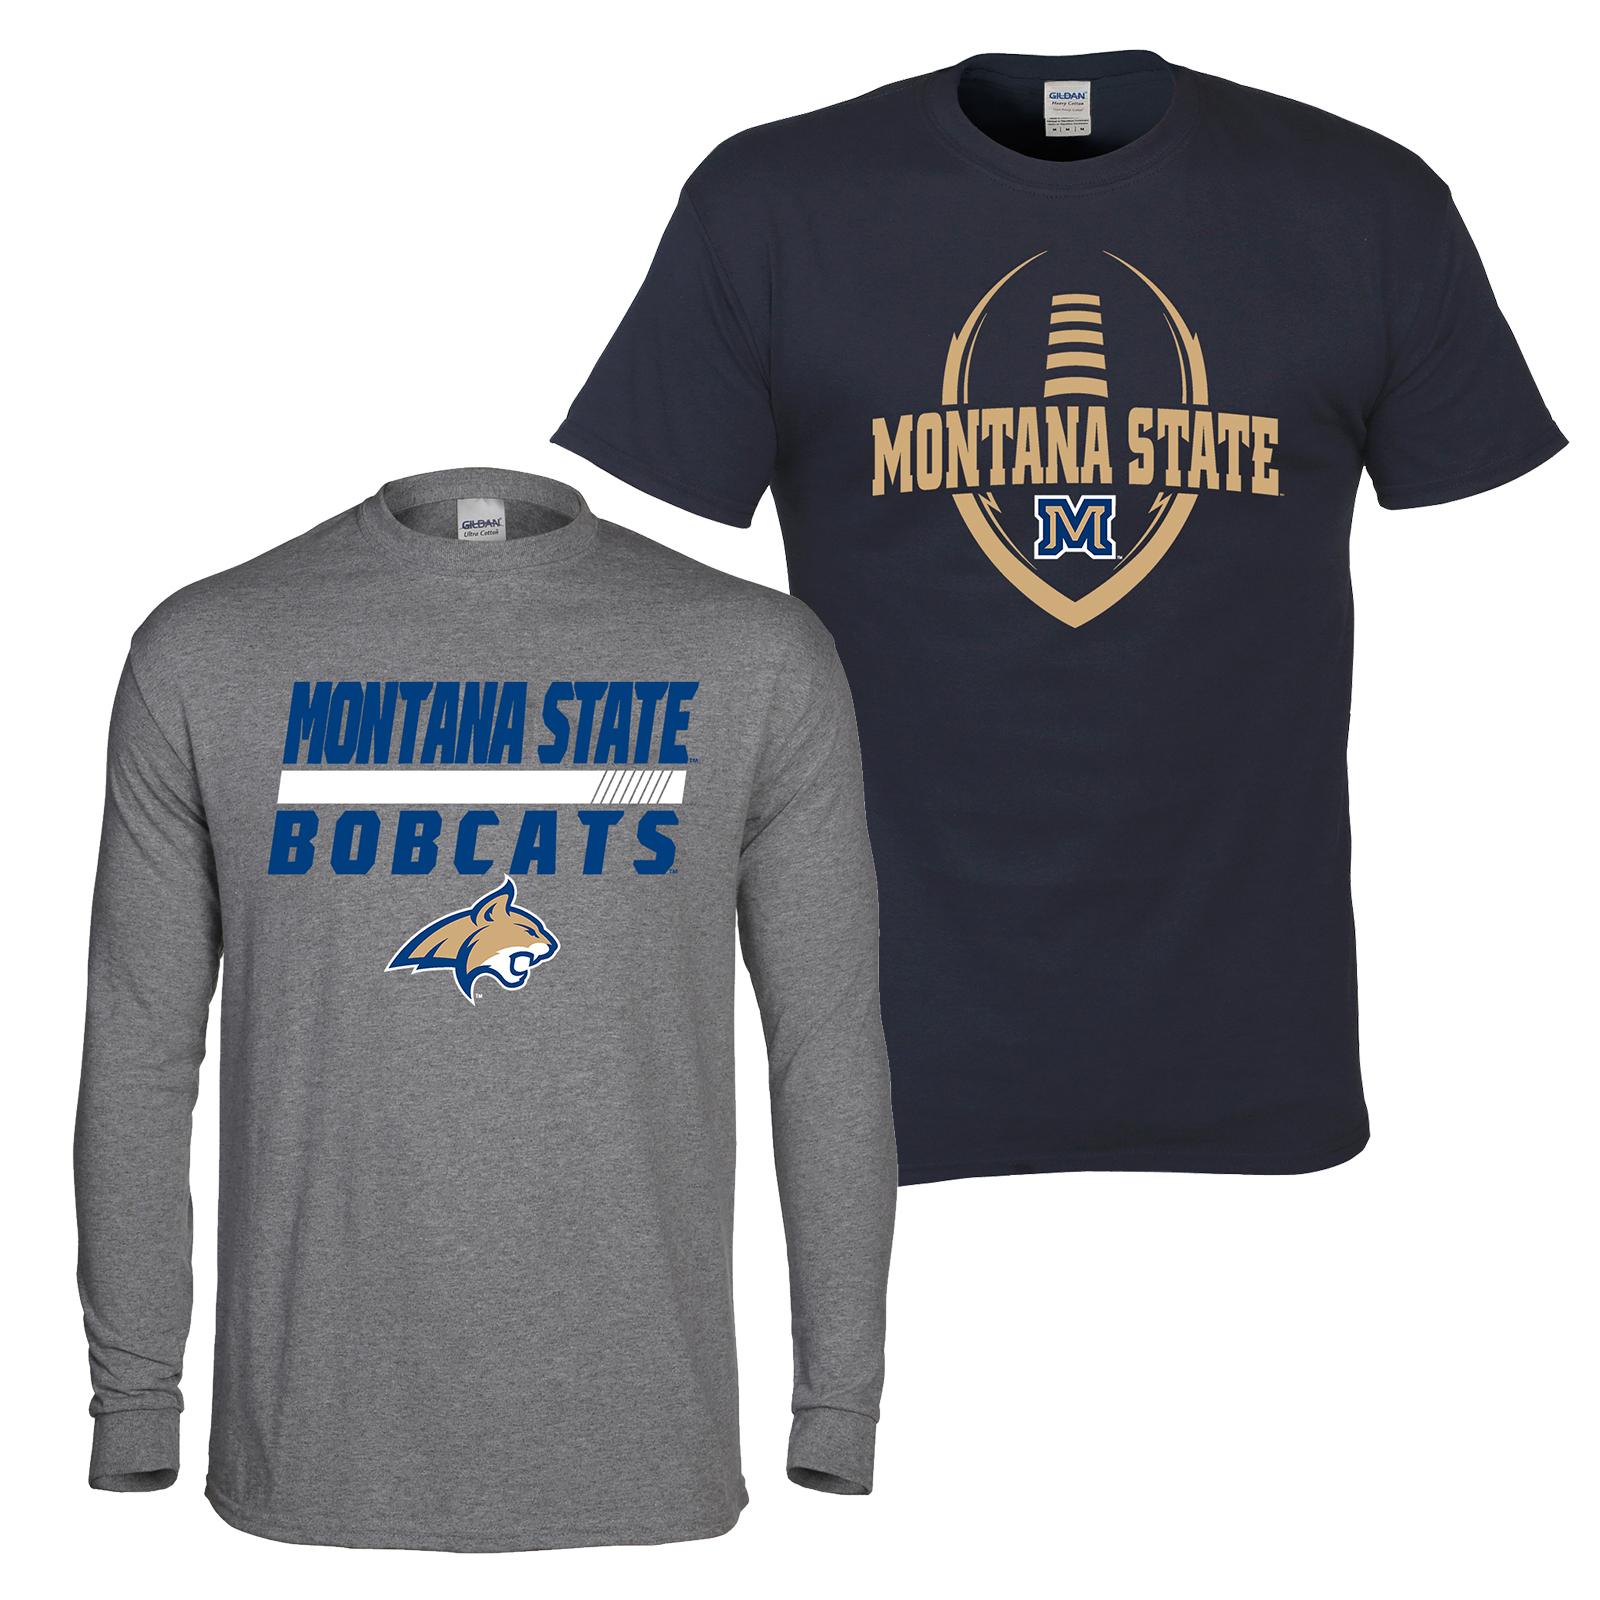 NCAA Boys' 2-Pack Graphic T-Shirts - Montana State Bobcats